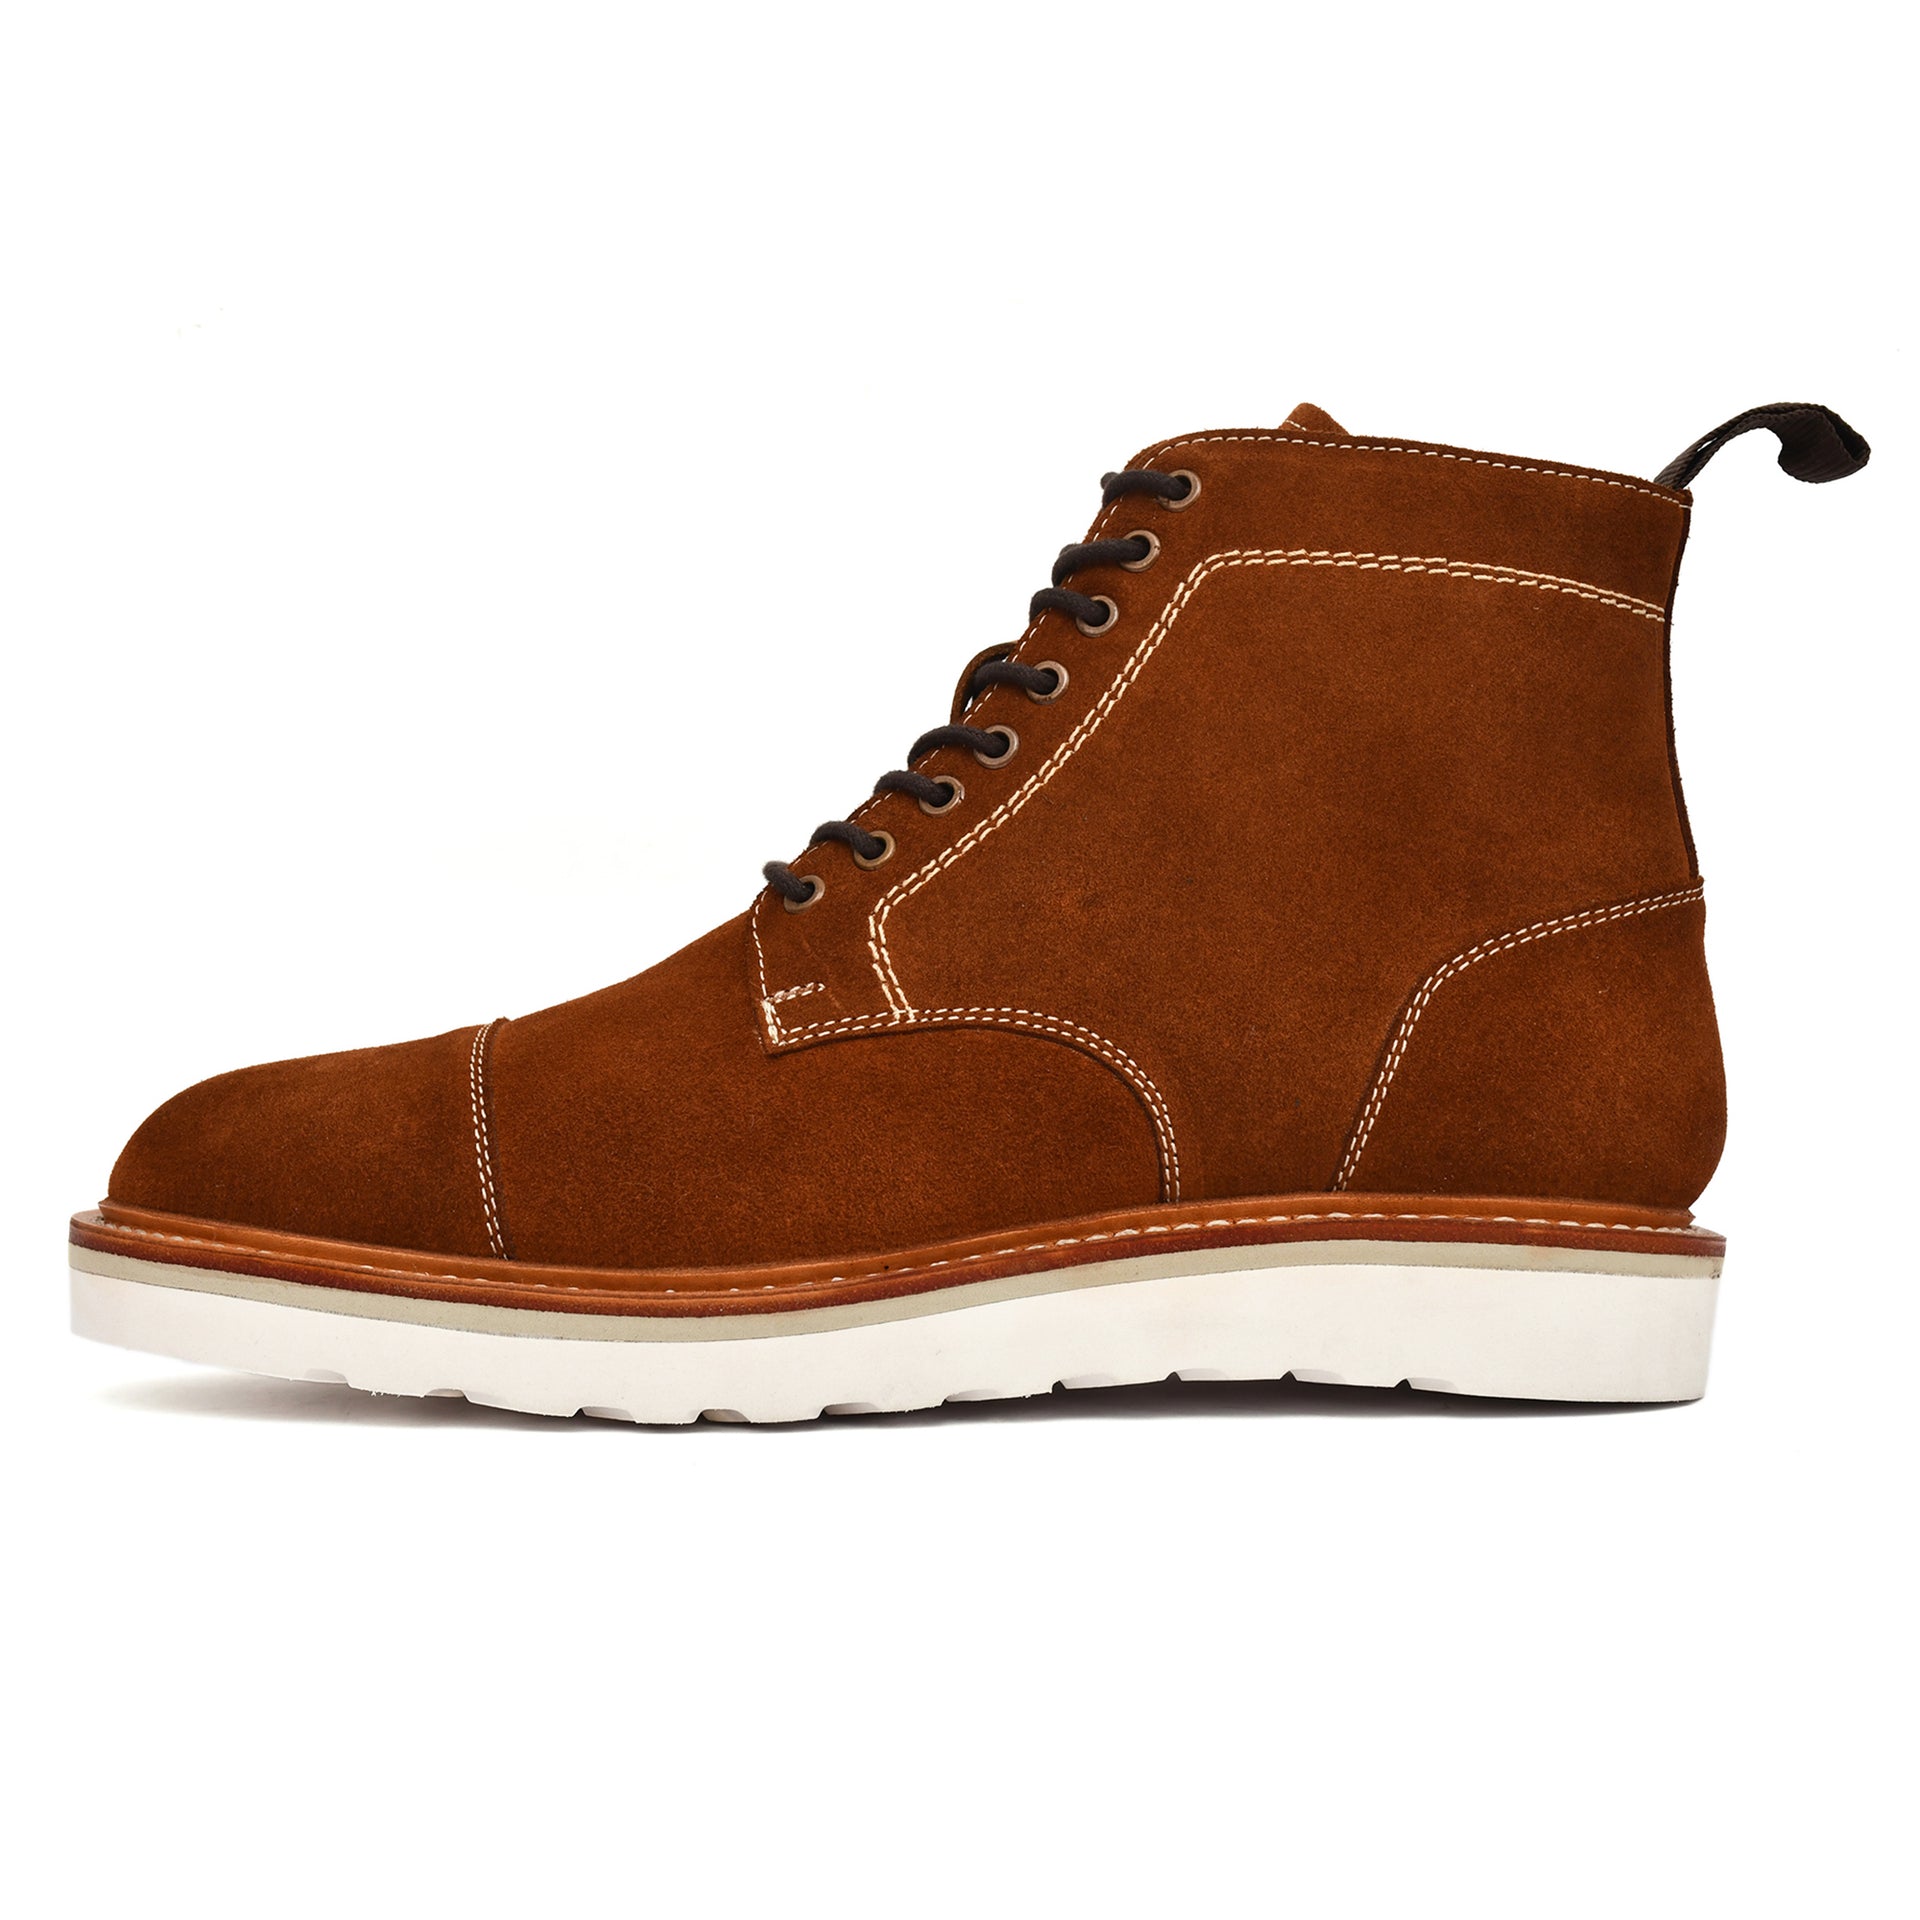 Timber Goodyear welted Cap toe Oxford boots light weight